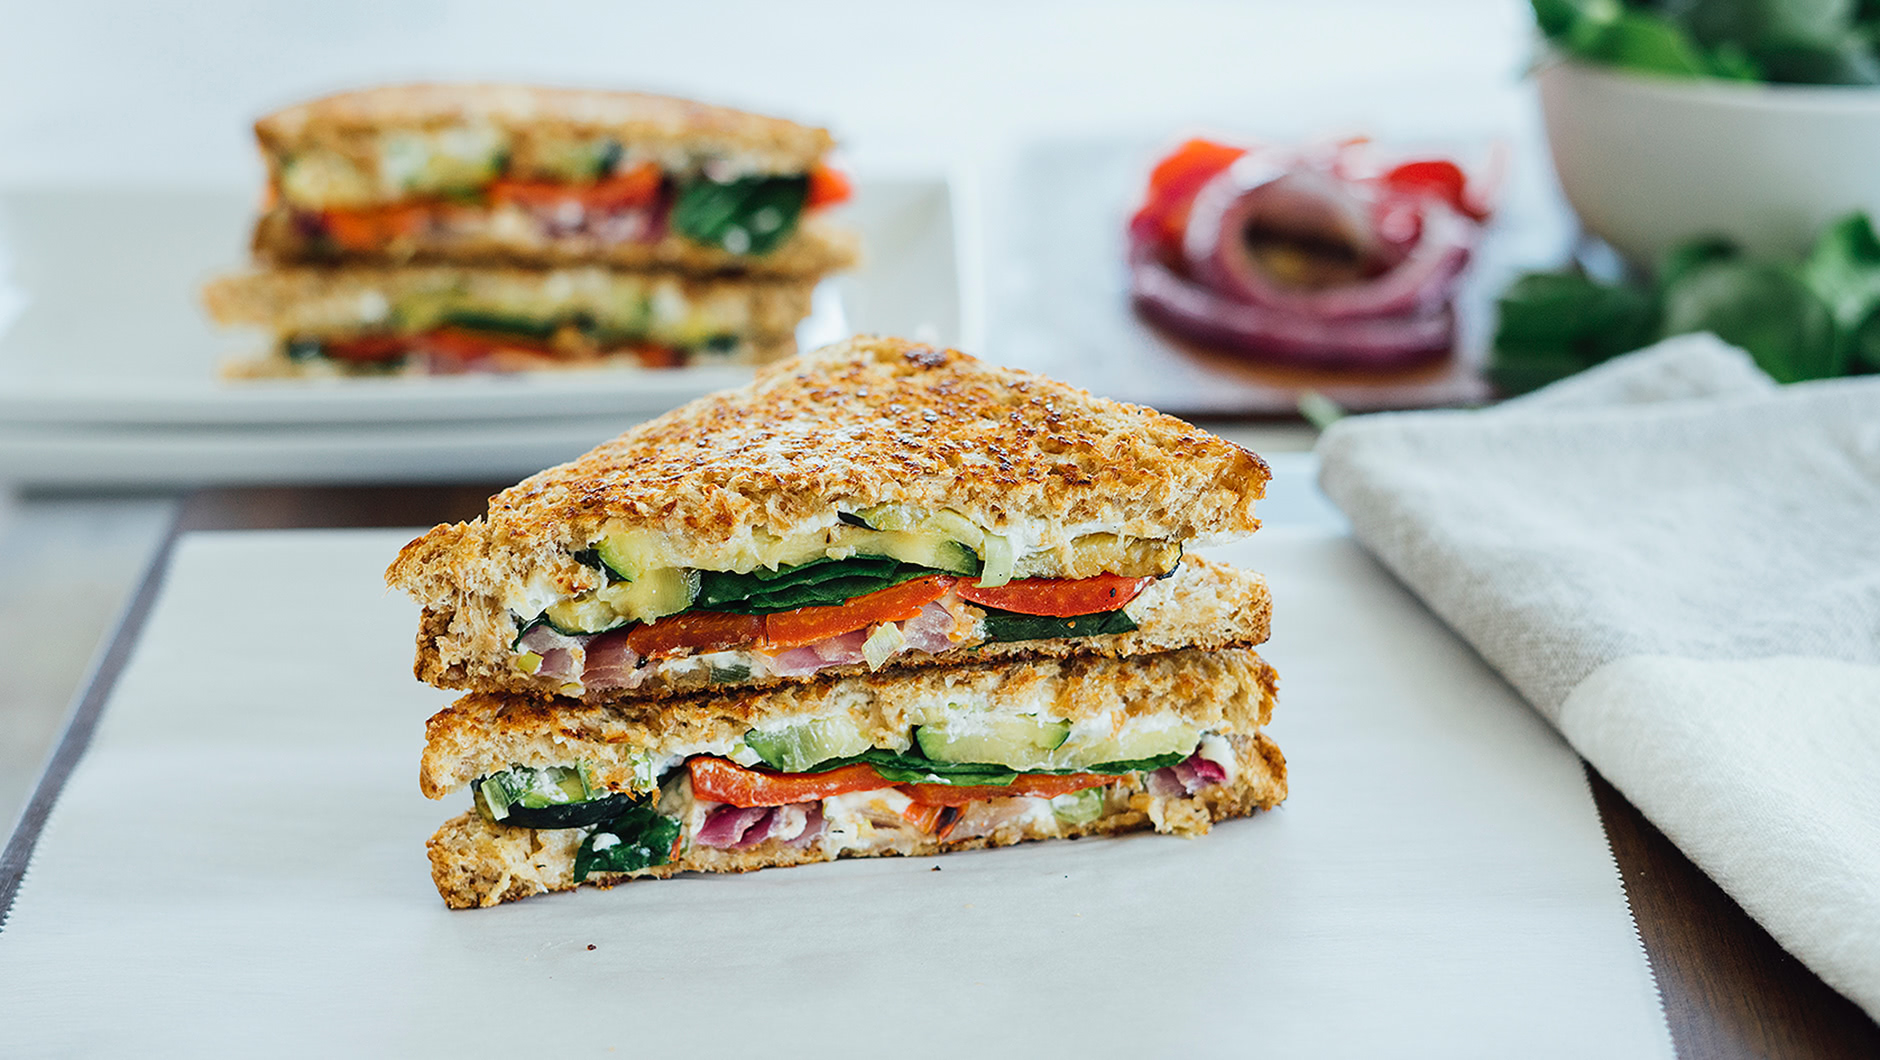 Spinach, Peppers, & Zucchini Grilled Cheese Recipe | What's for Dinner?